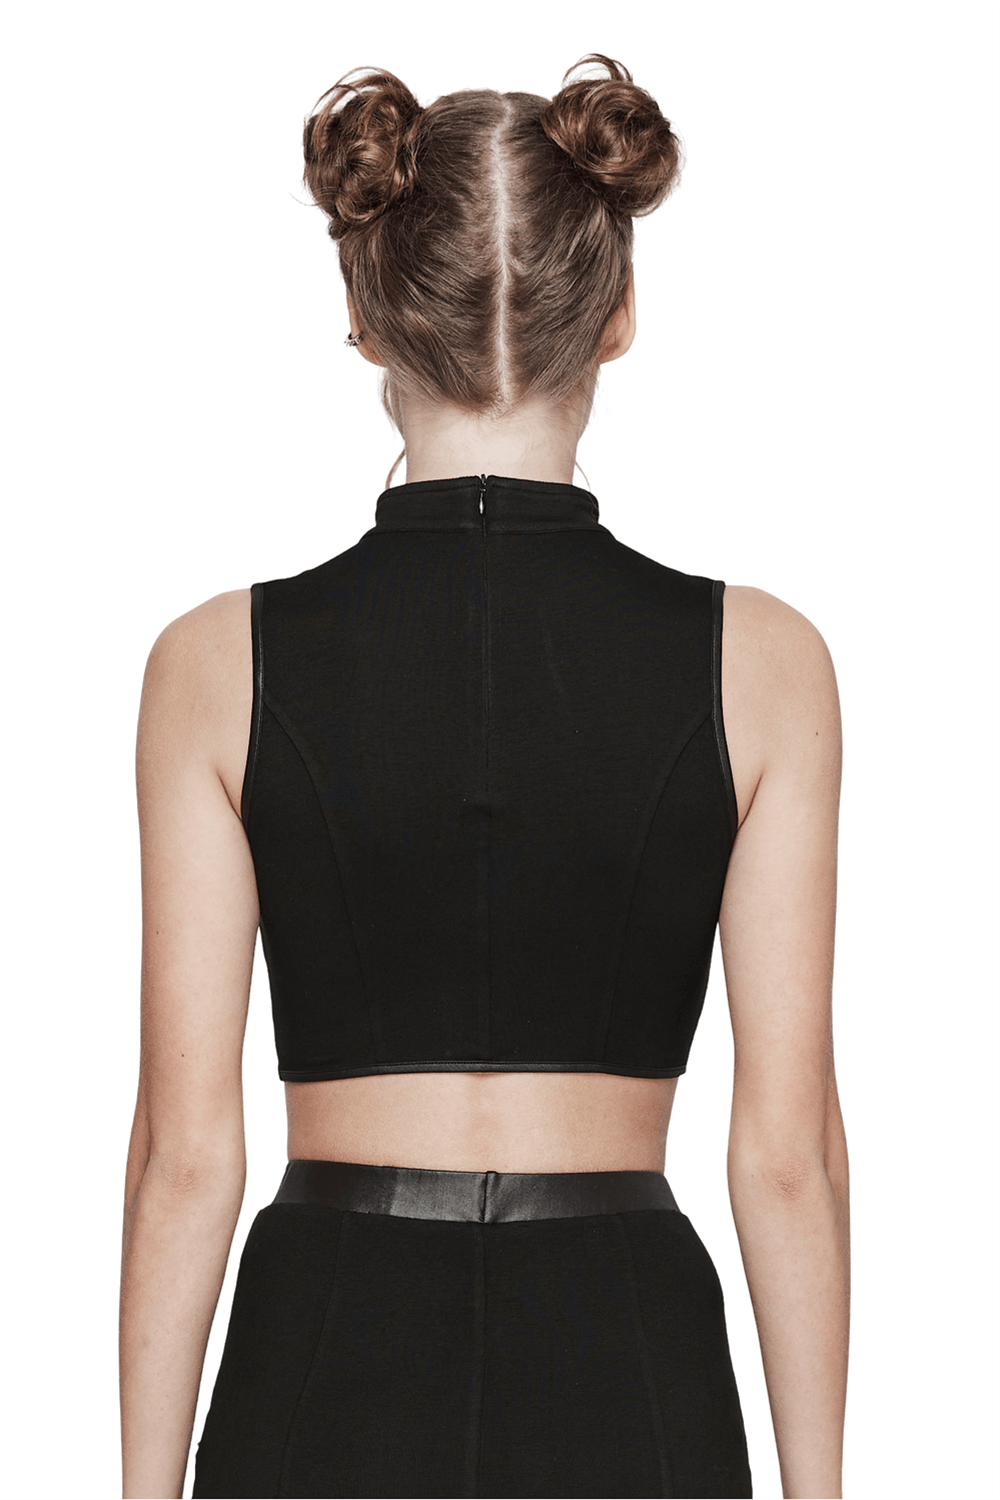 Chic Punk Lace-up Crop Top with Buckle and Mesh